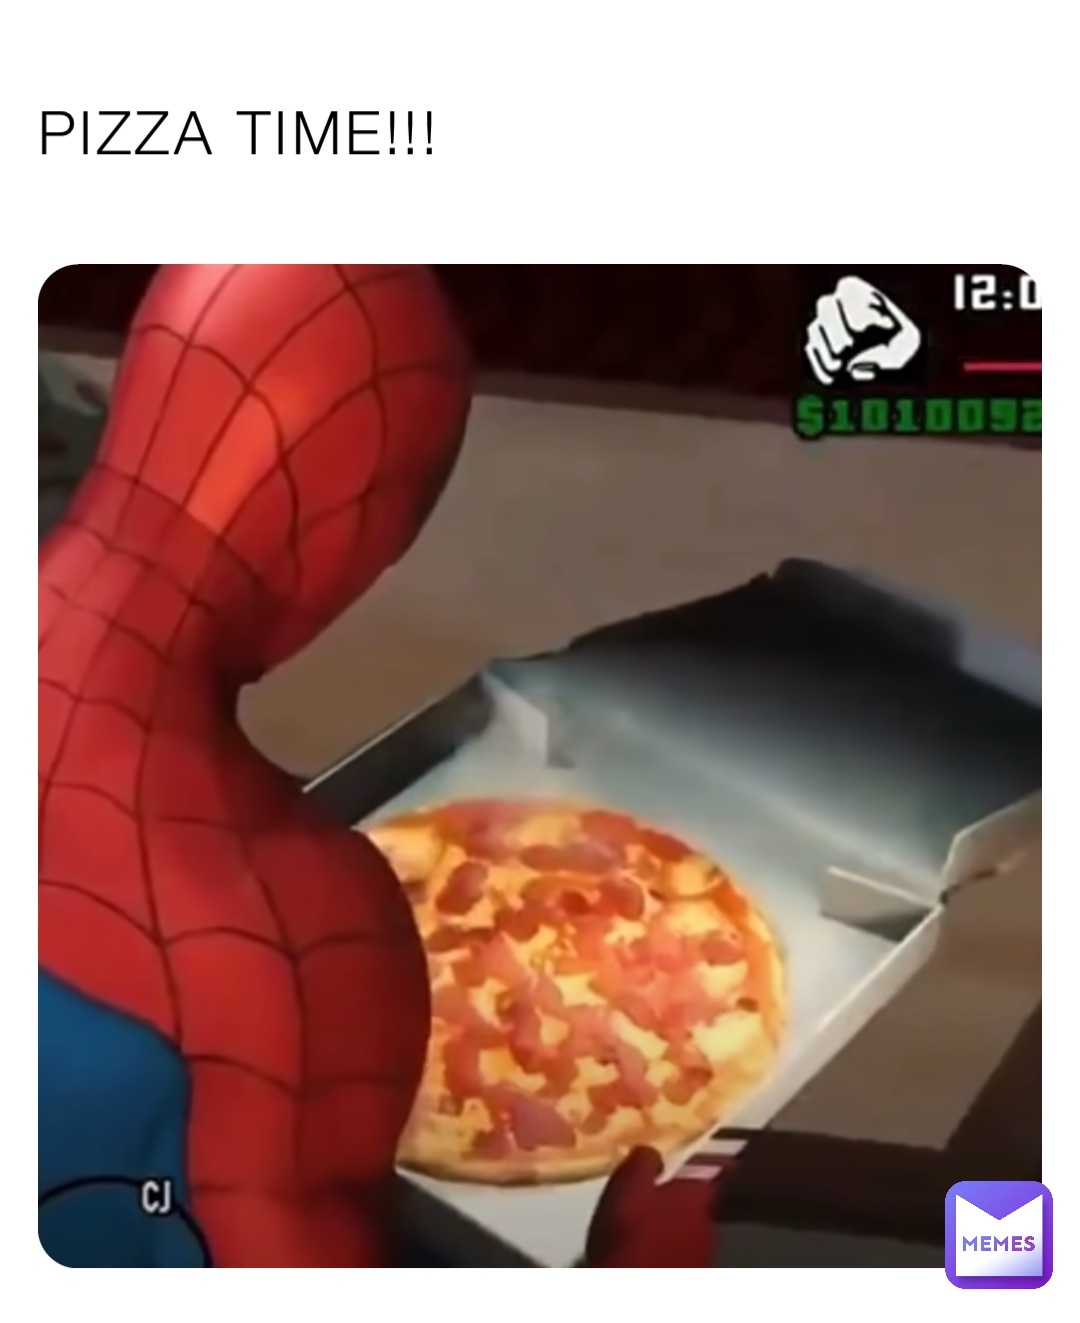 PIZZA TIME!!! | @GOOD_TIMES | Memes